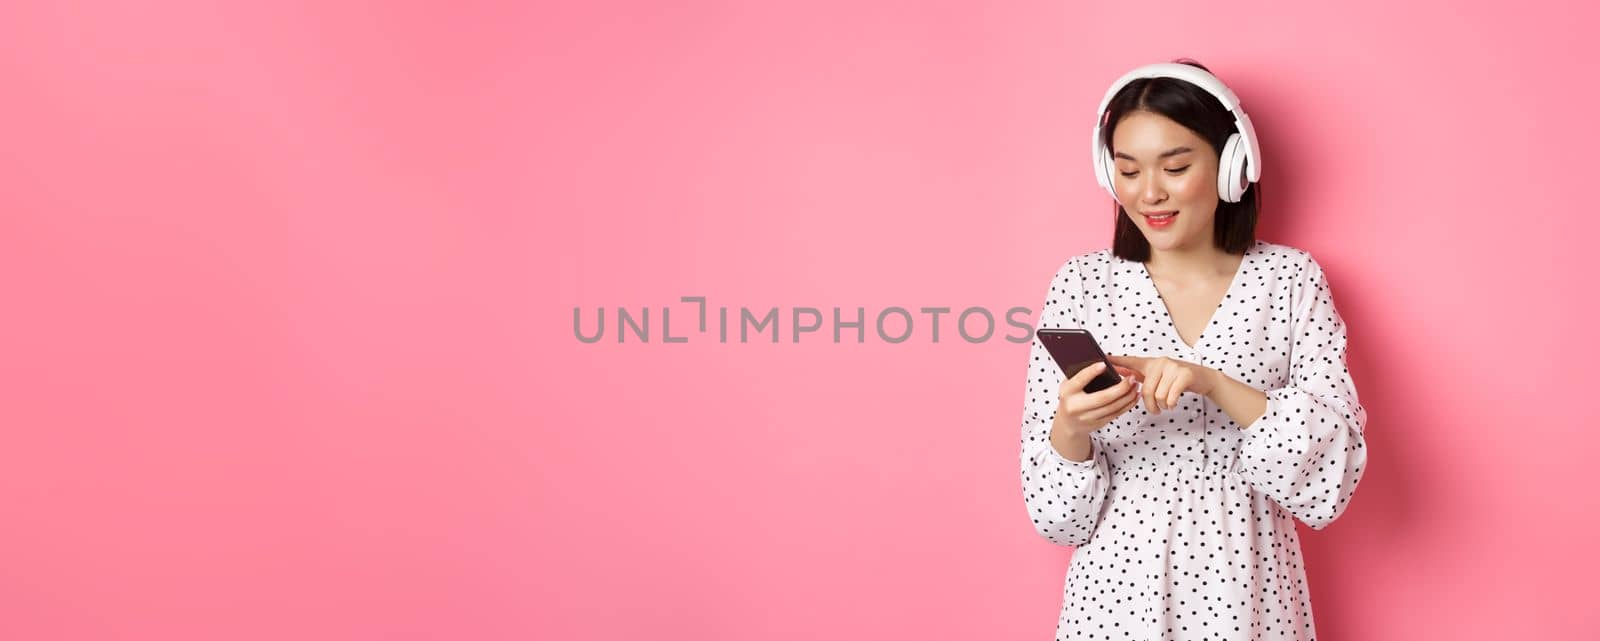 Beautiful asian woman texting message on smartphone, listening music in headphones, standing over pink background.